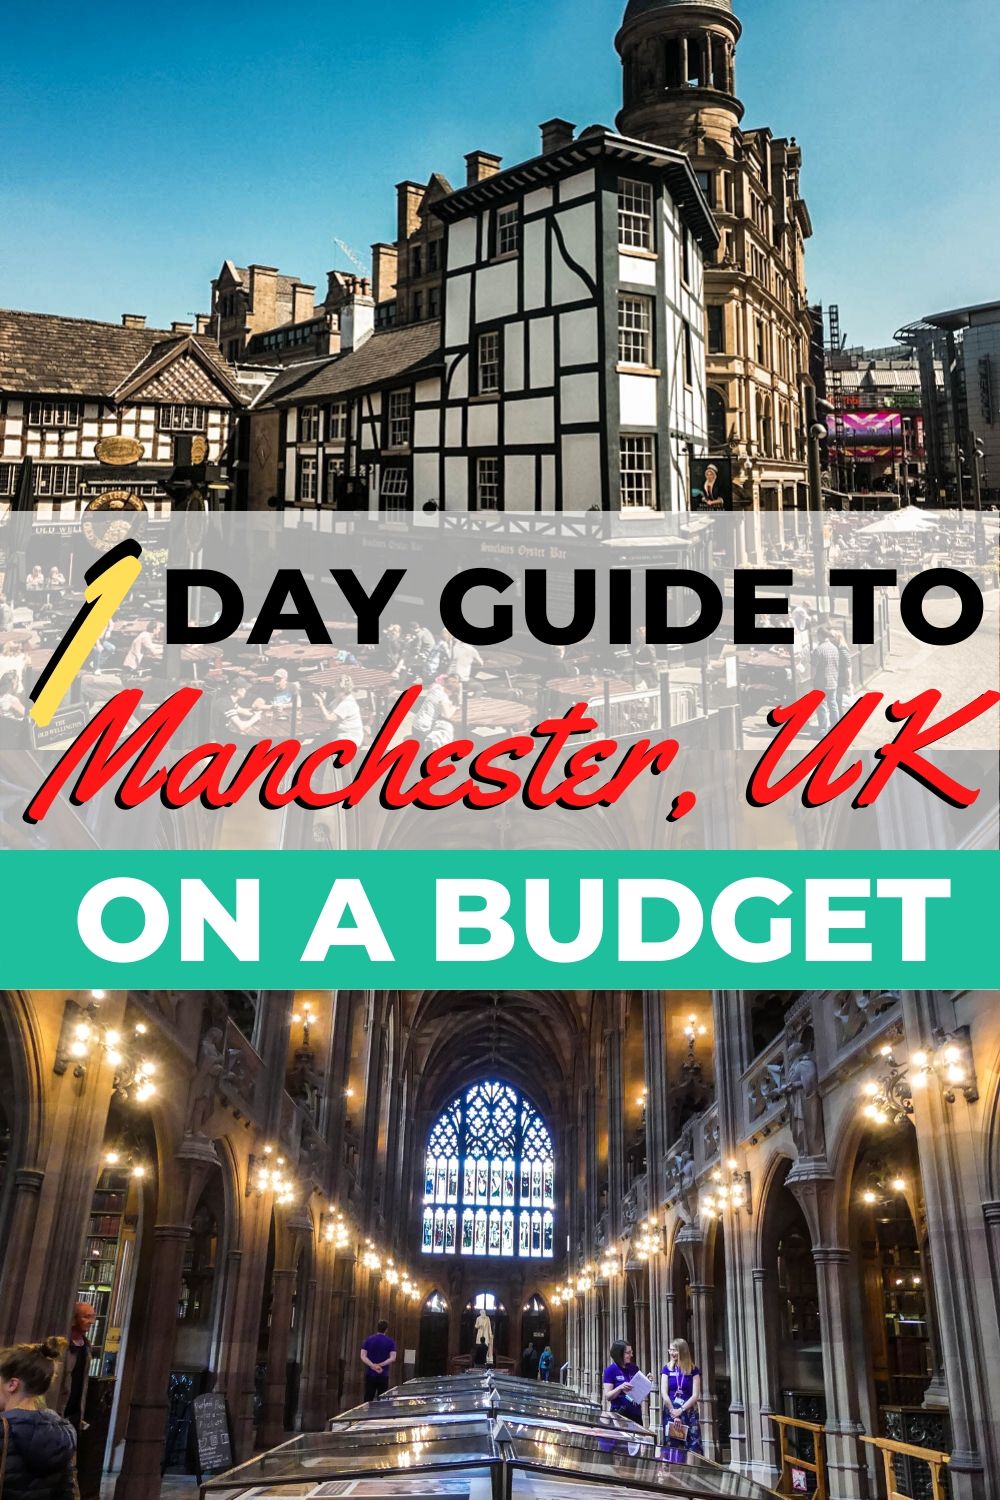 Things to Do in Manchester - Manchester travel guide – Go Guides